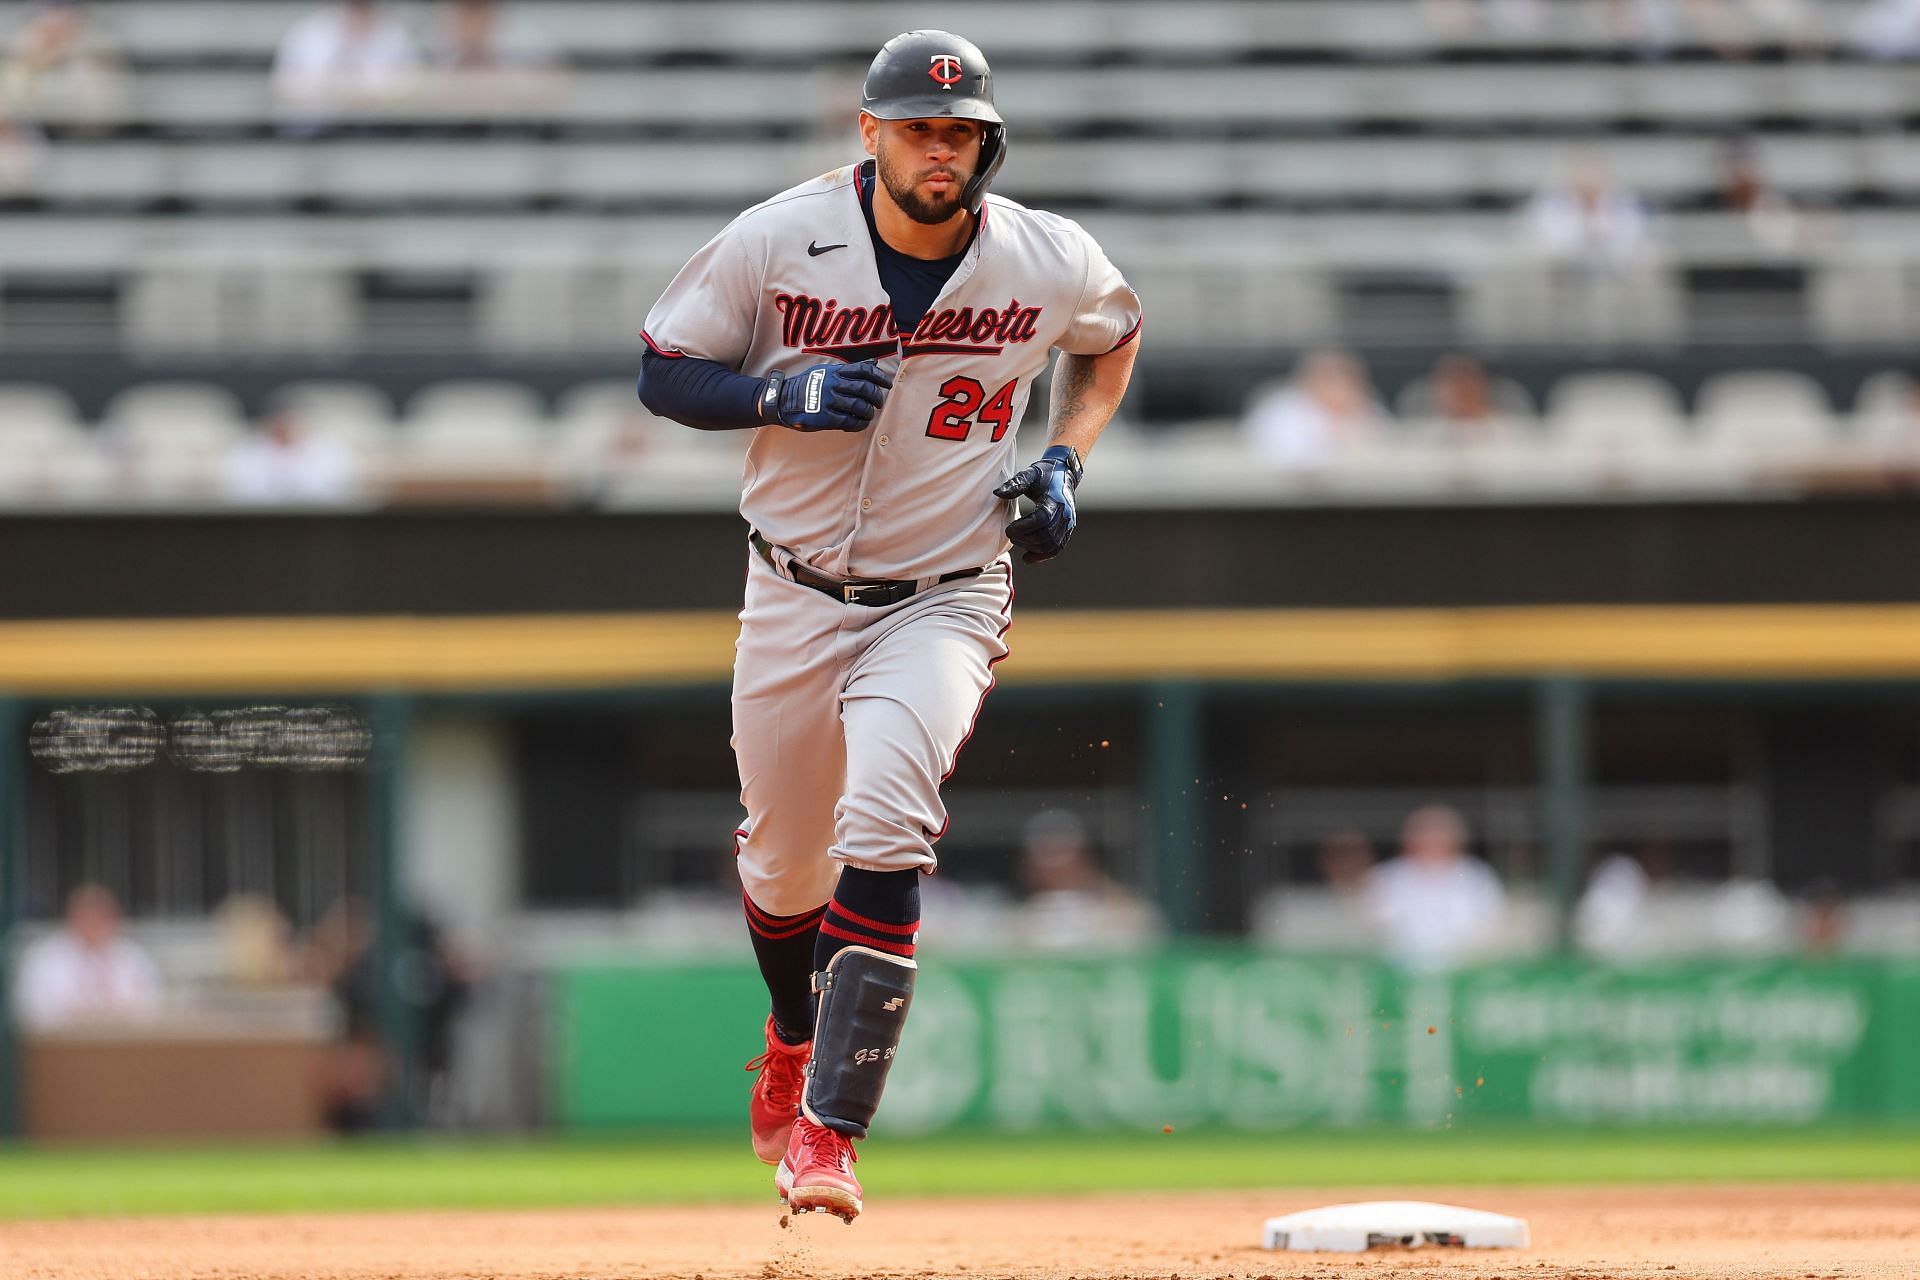 Gary Sanchez of the Minnesota Twins rounds the bases after hitting a three-run home run.